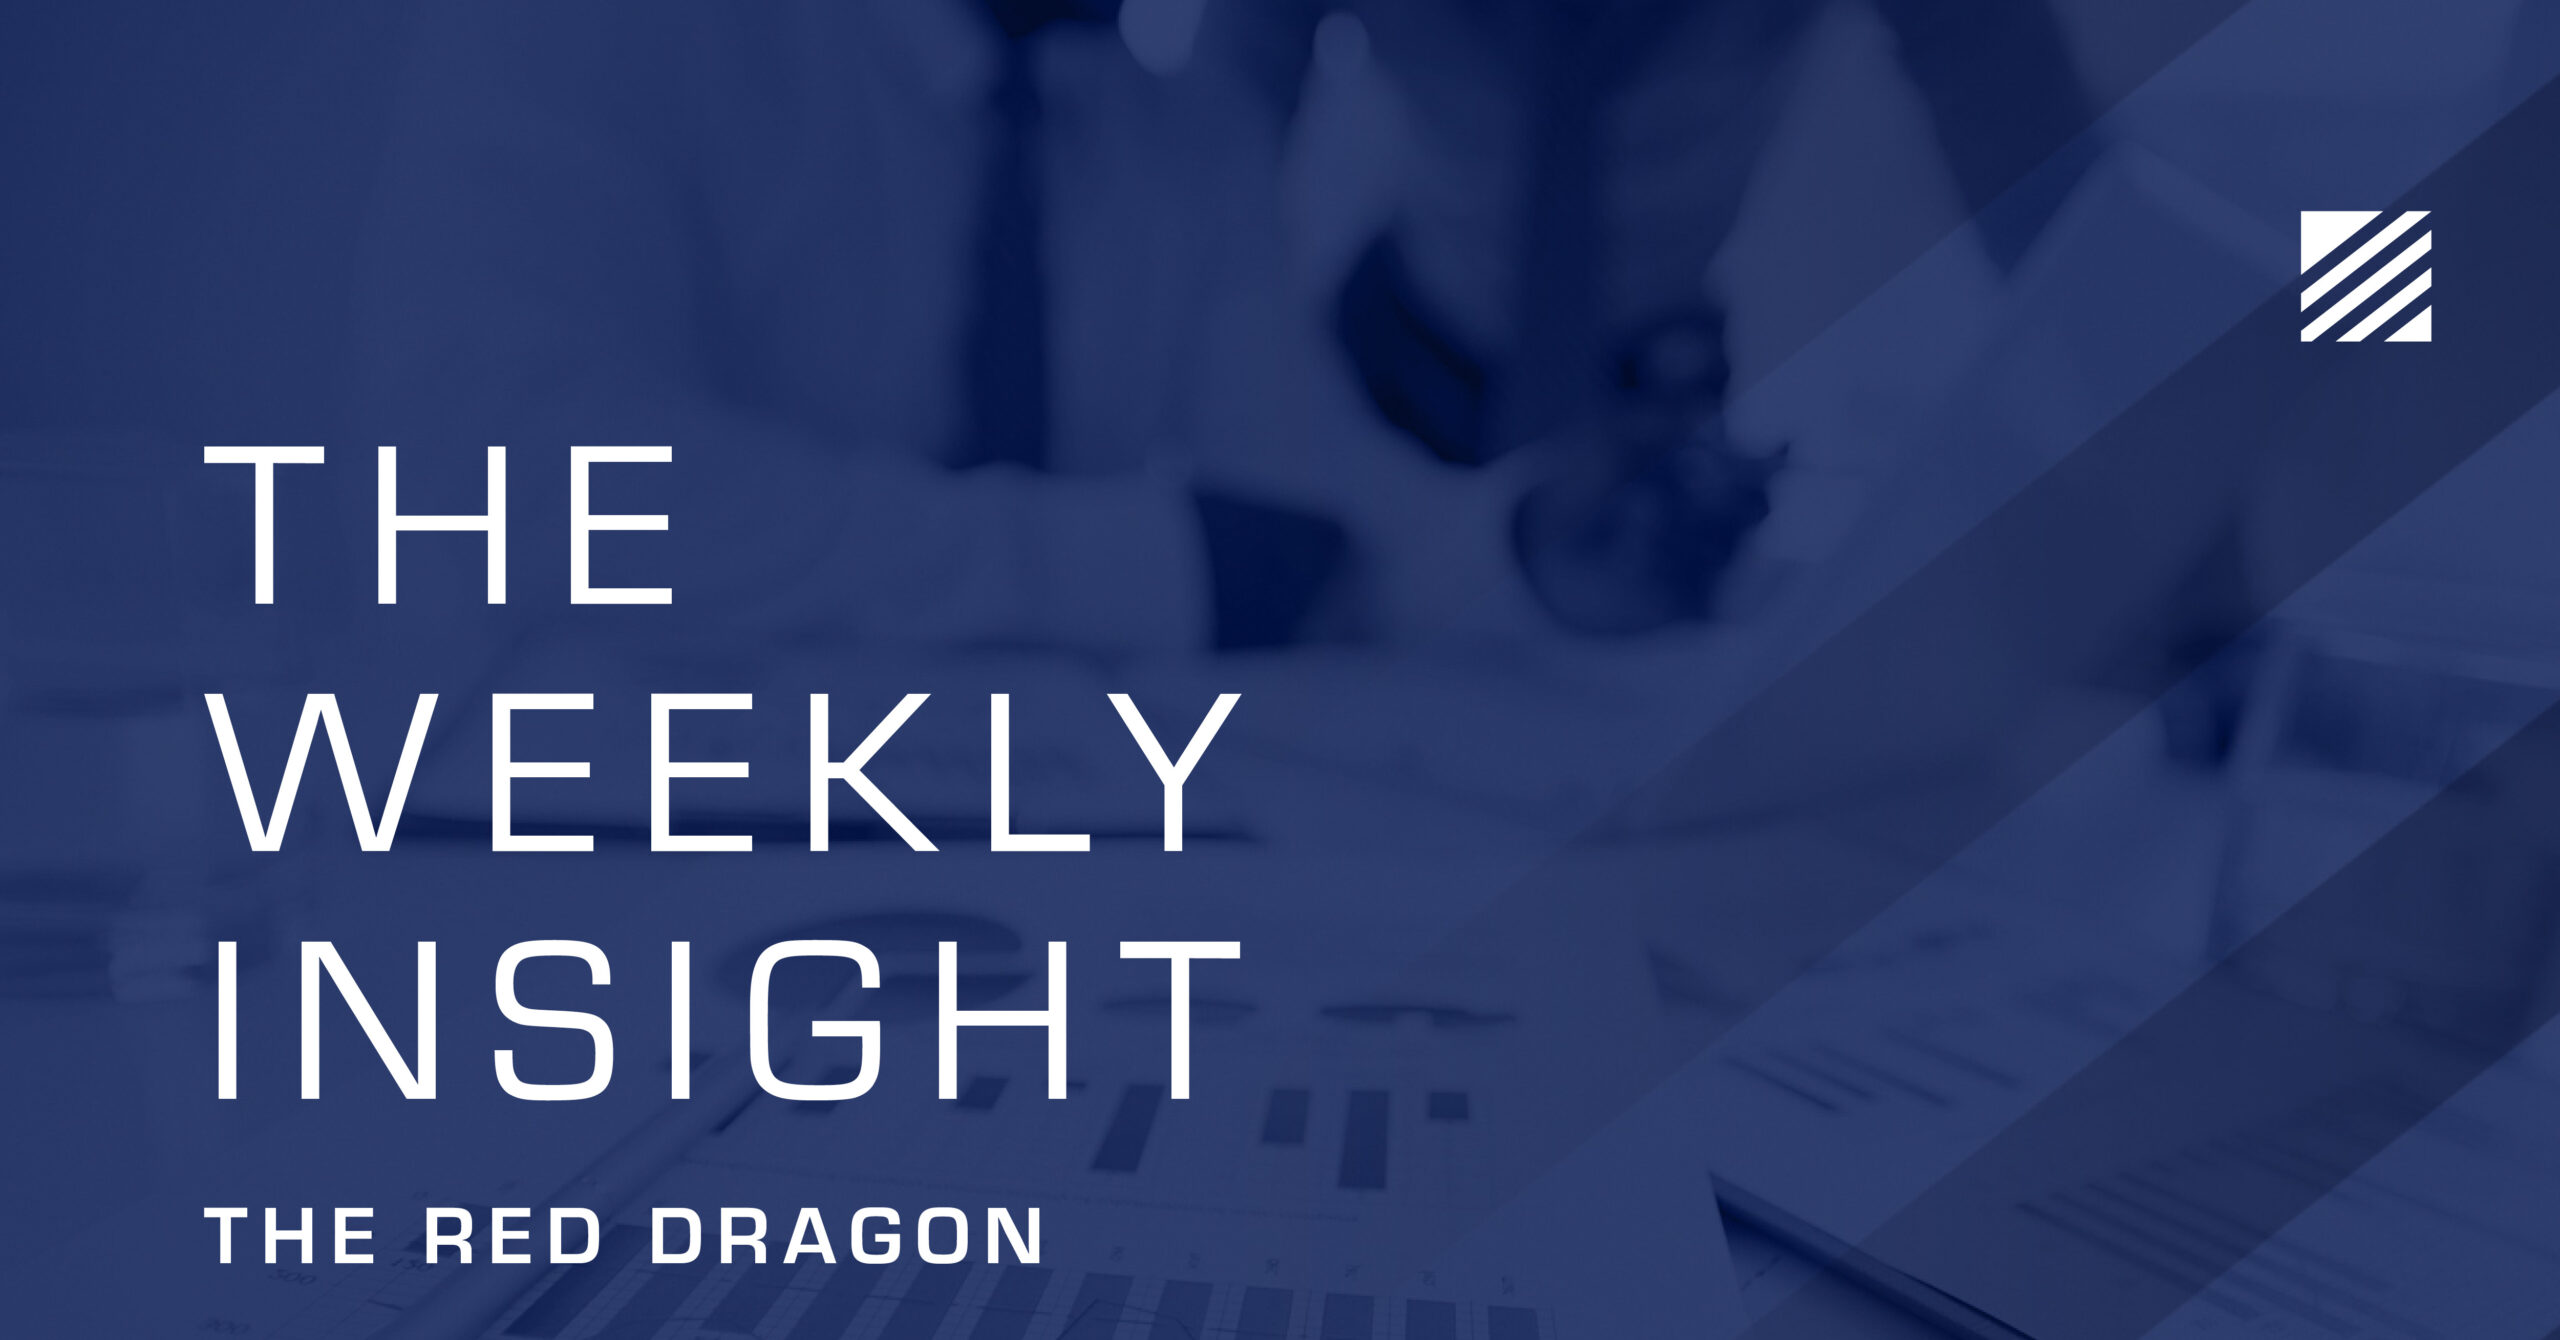 The Weekly Insight: The Red Dragon Graphic